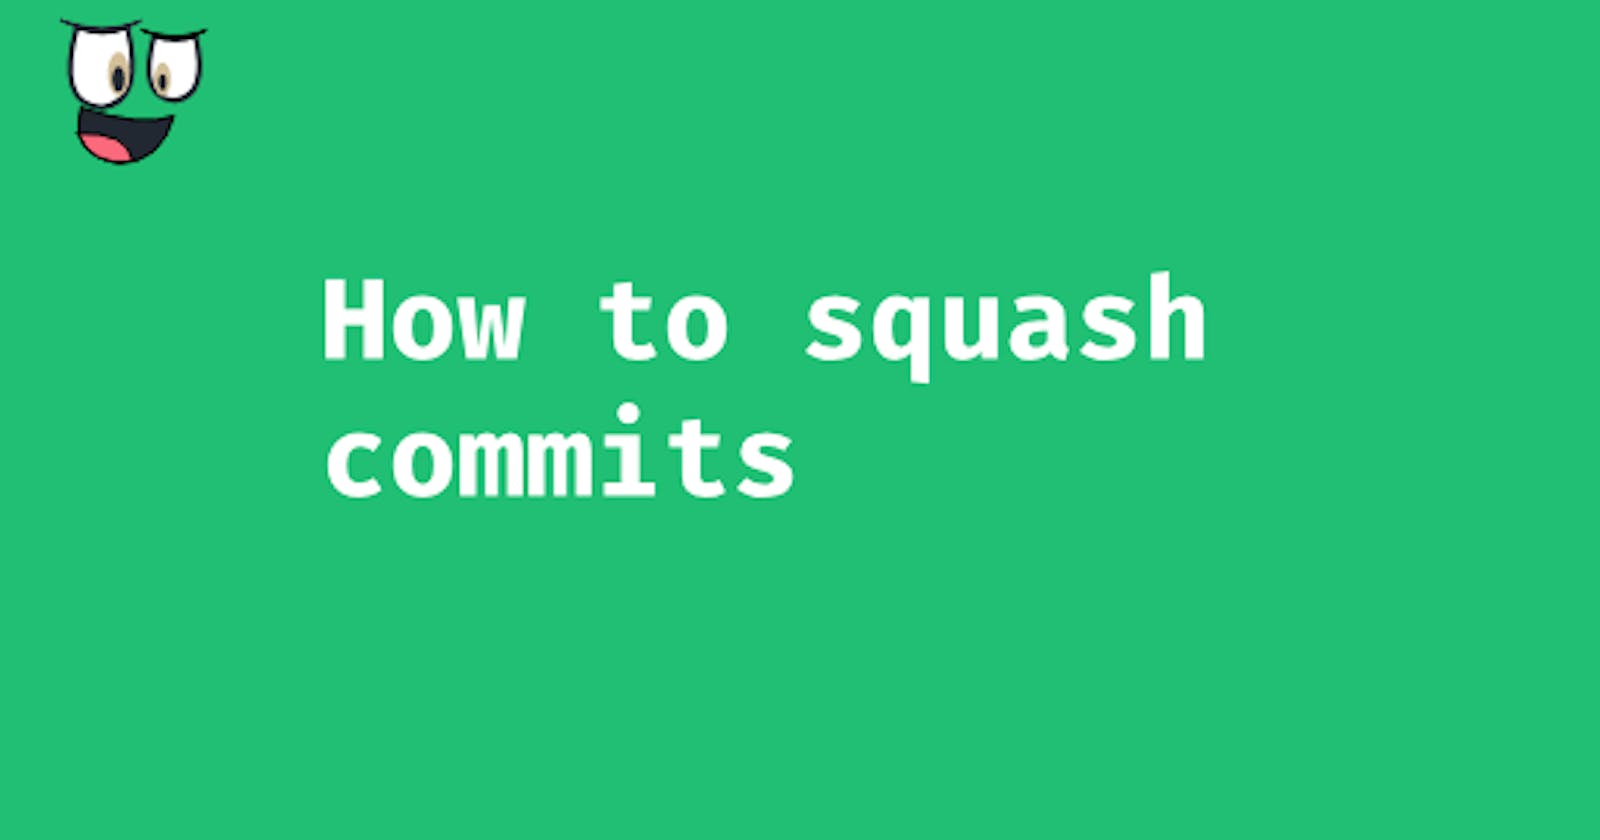 I keep on forgetting how to squash commits